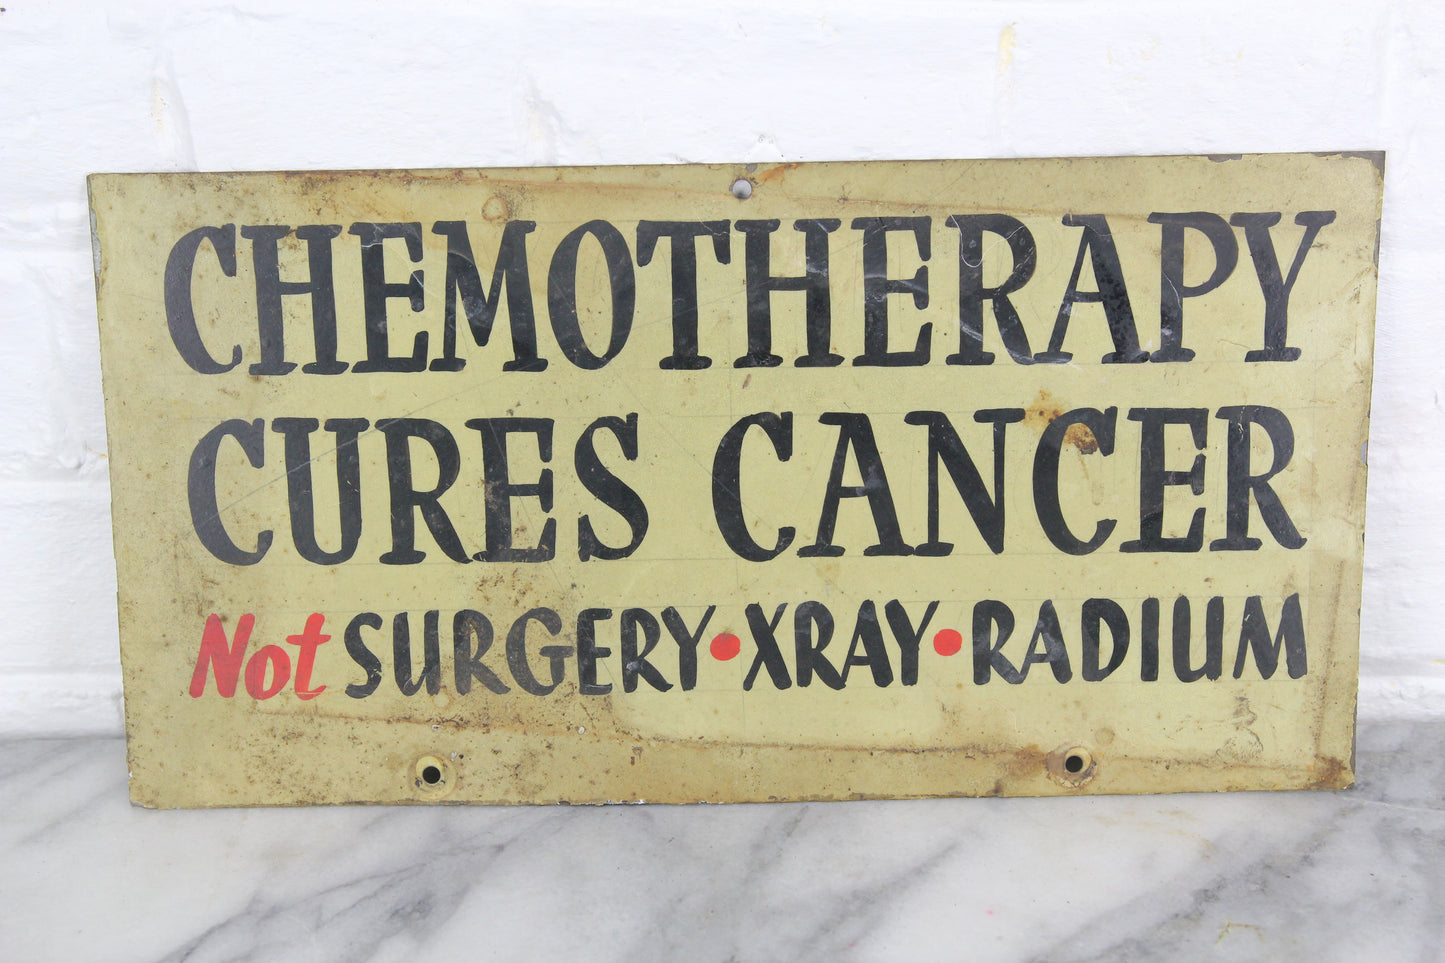 Chemotherapy Cures Cancer, Handpainted Metal Sign by Leader Signs, Worcester, MA - 13x6"